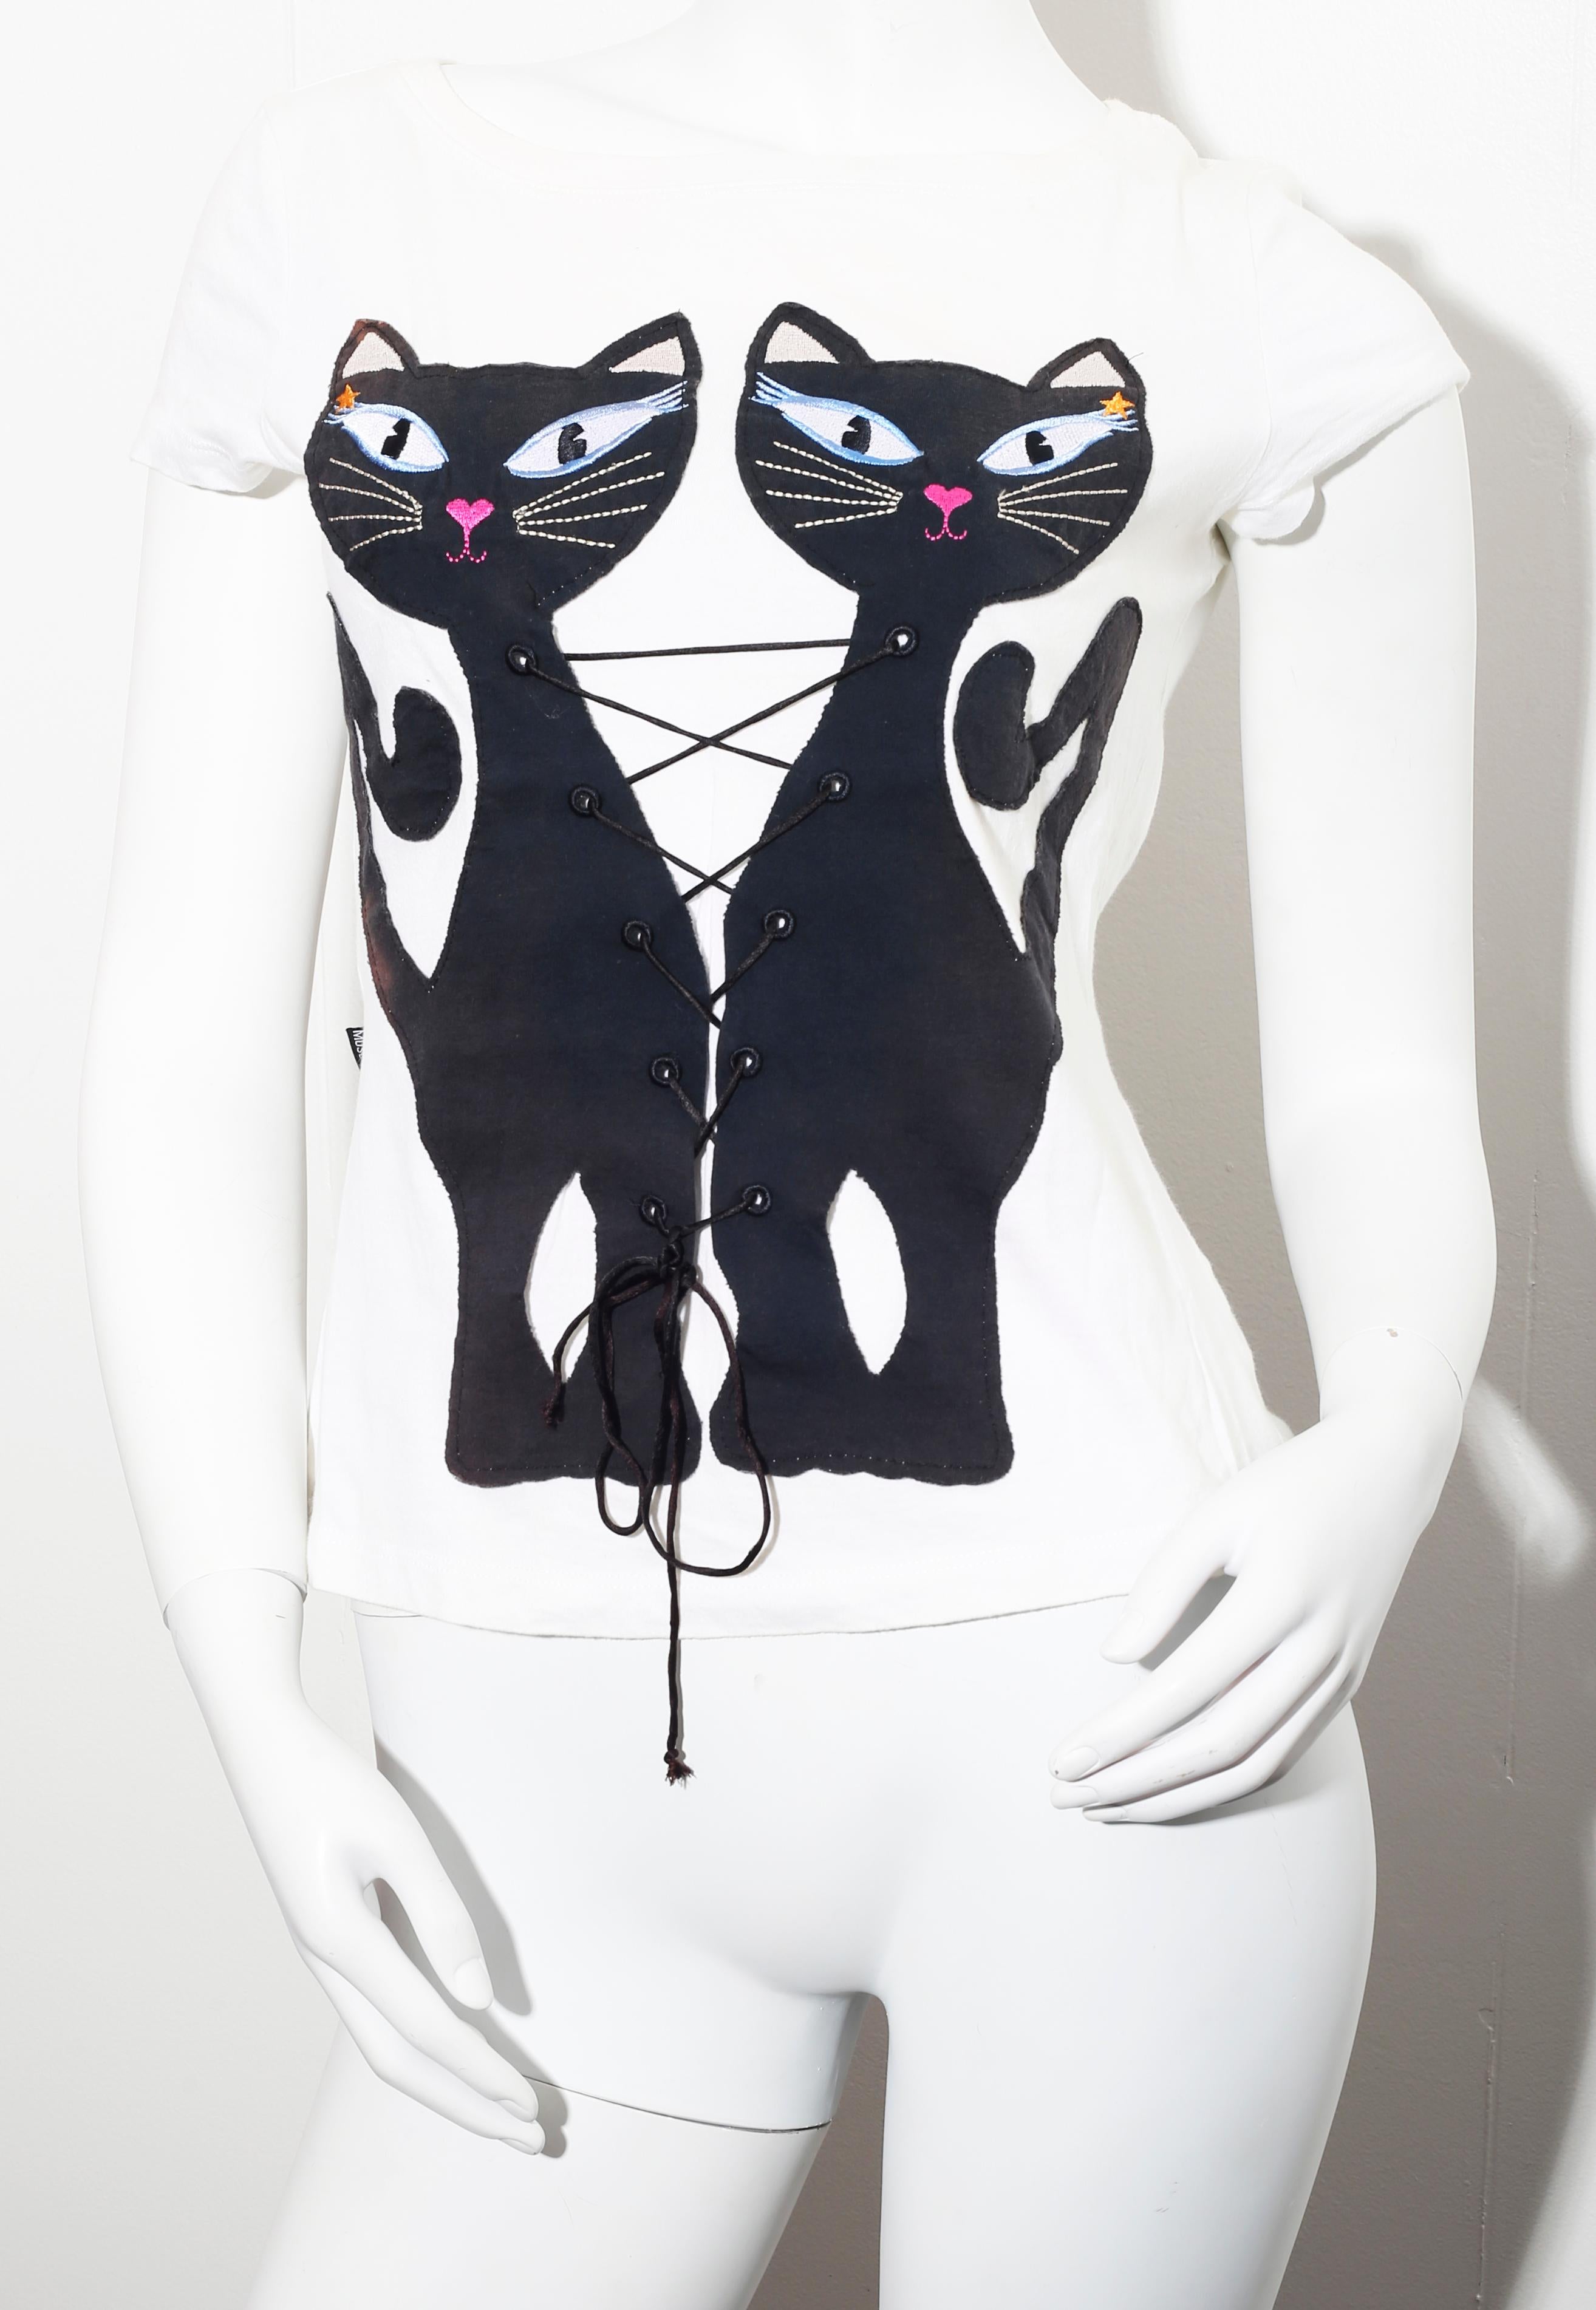 Chic and Unique Vintage 1990´s Moschino Couture twin cats interlace bustier white and black strech t-shirt
With  lace
Vintage never worn, bought as collector piece
Made in Italy
Marked Size Italy 42 US 8 can fit smaller sizes too since textile is